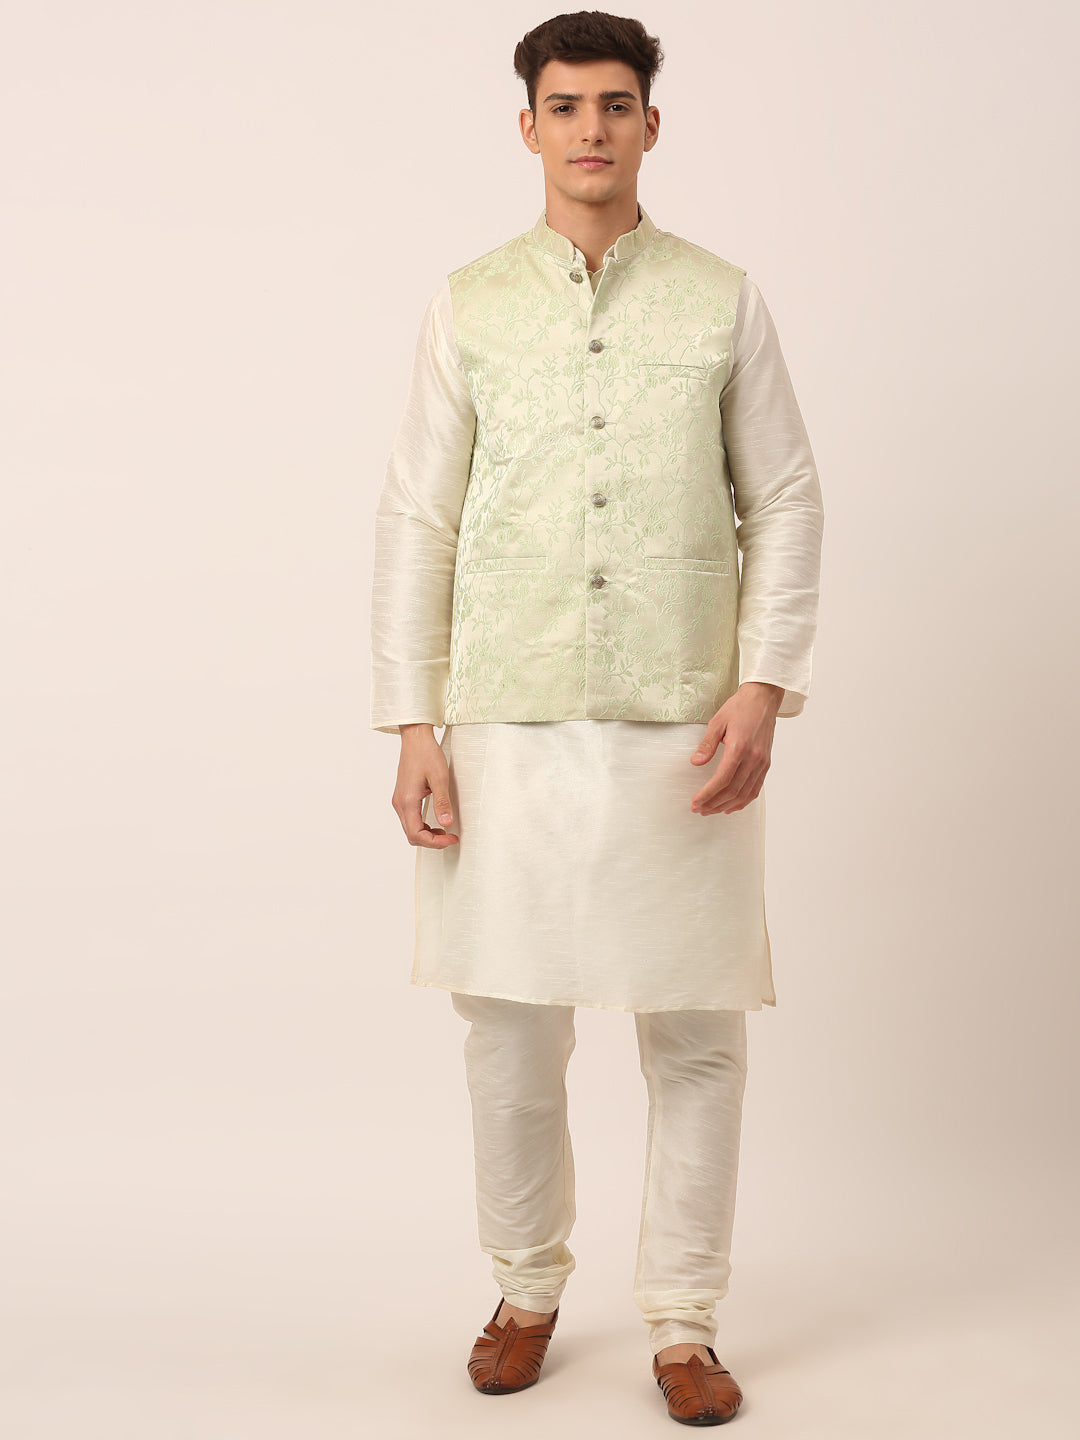 Shop Online Silk Printed Kurta Payjama With Jacket in Green and White :  232331 -